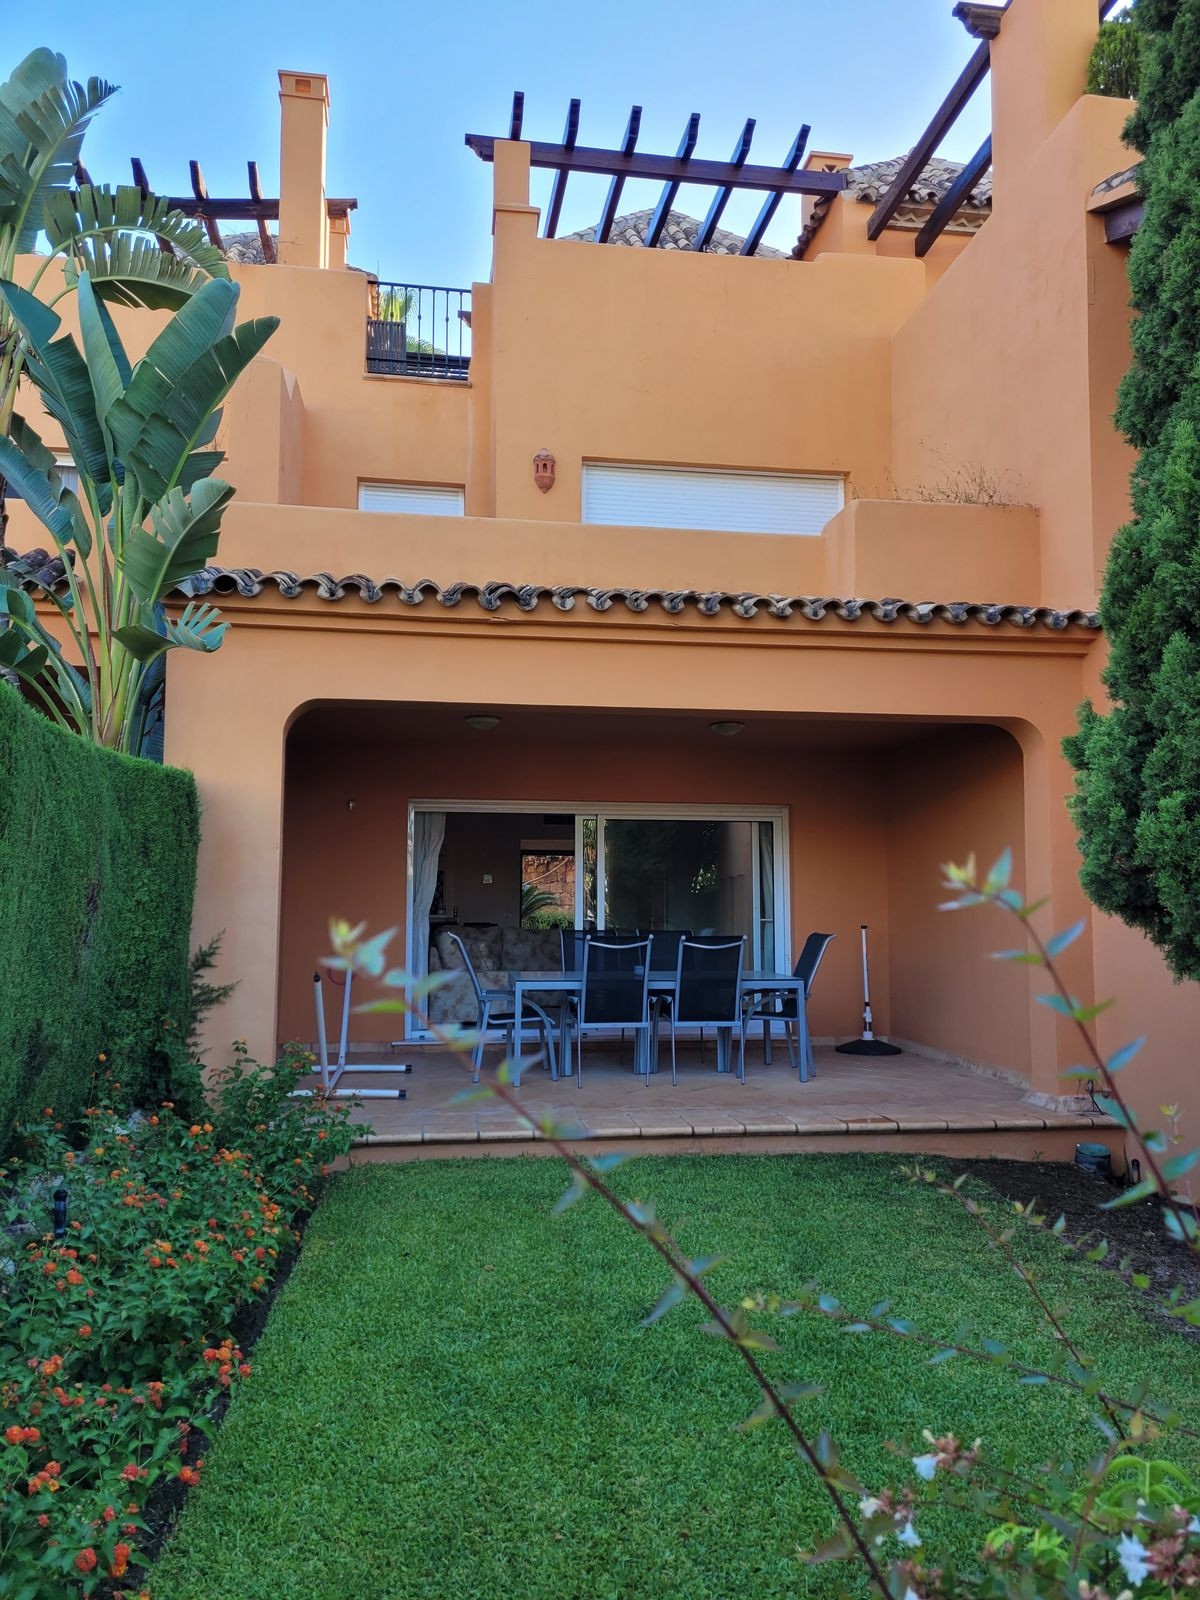 Townhouse with 3 bedrooms with fitted wardrobes, 2 bathrooms and a toilet. Living room with fireplac, Spain